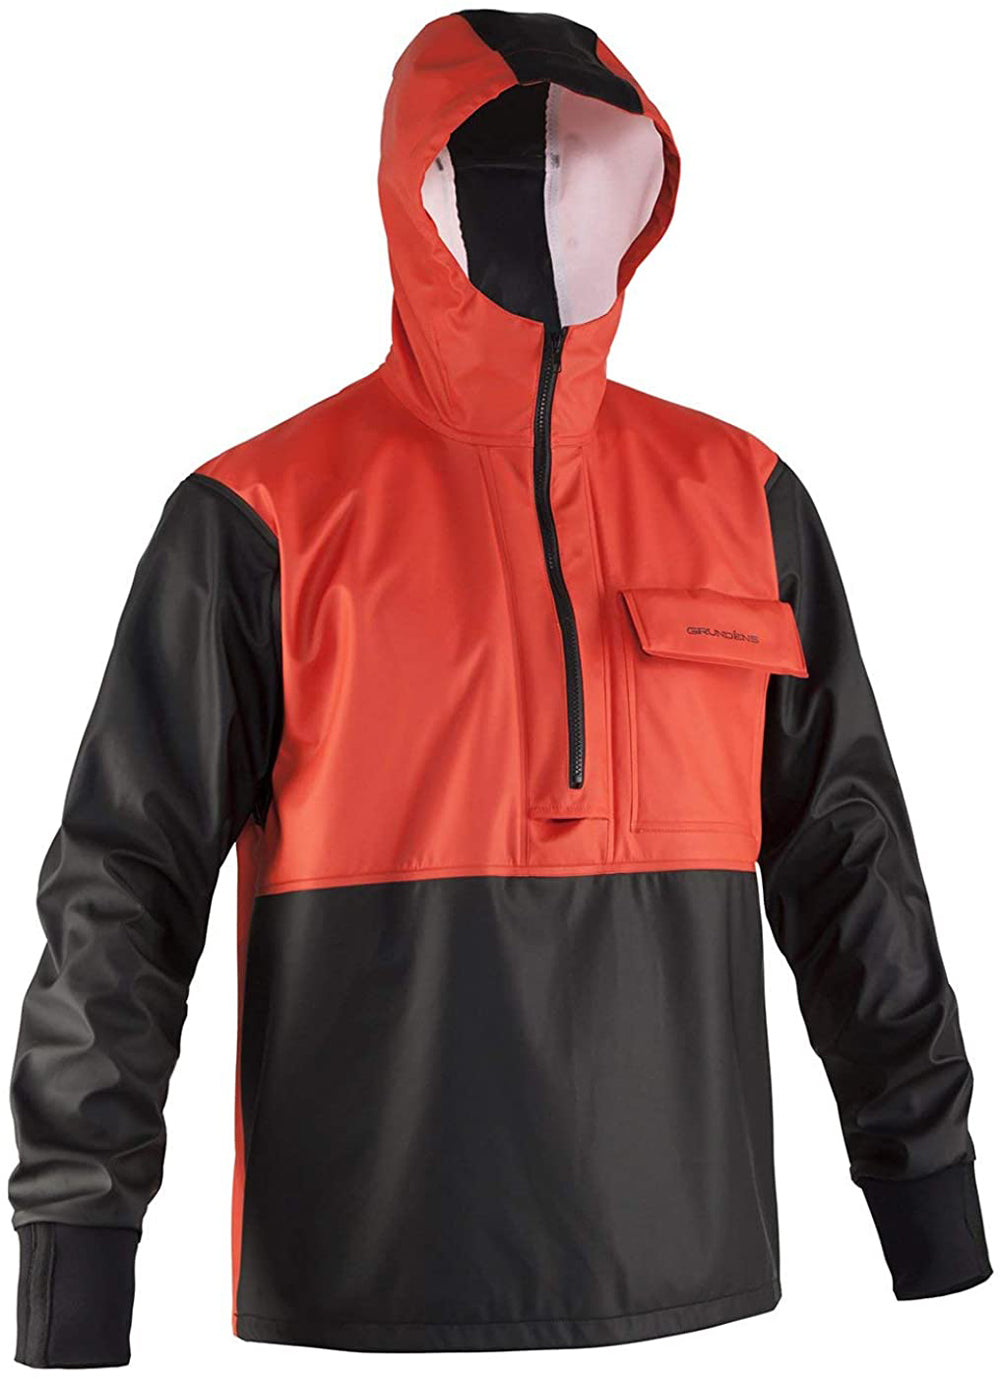 Neptune Anorak in Orange color from the front view